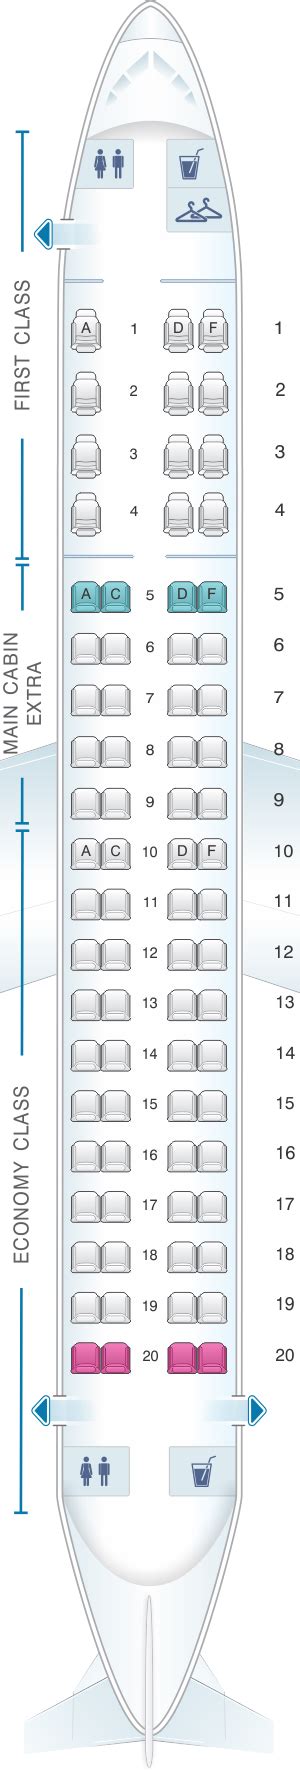 Embraer 175 american airlines seat map. For your next American Airlines flight, use this seating chart to get the most comfortable ... Embraer ERJ-175 (E75) Layout 1; ... American Airlines flies 0 versions of . 